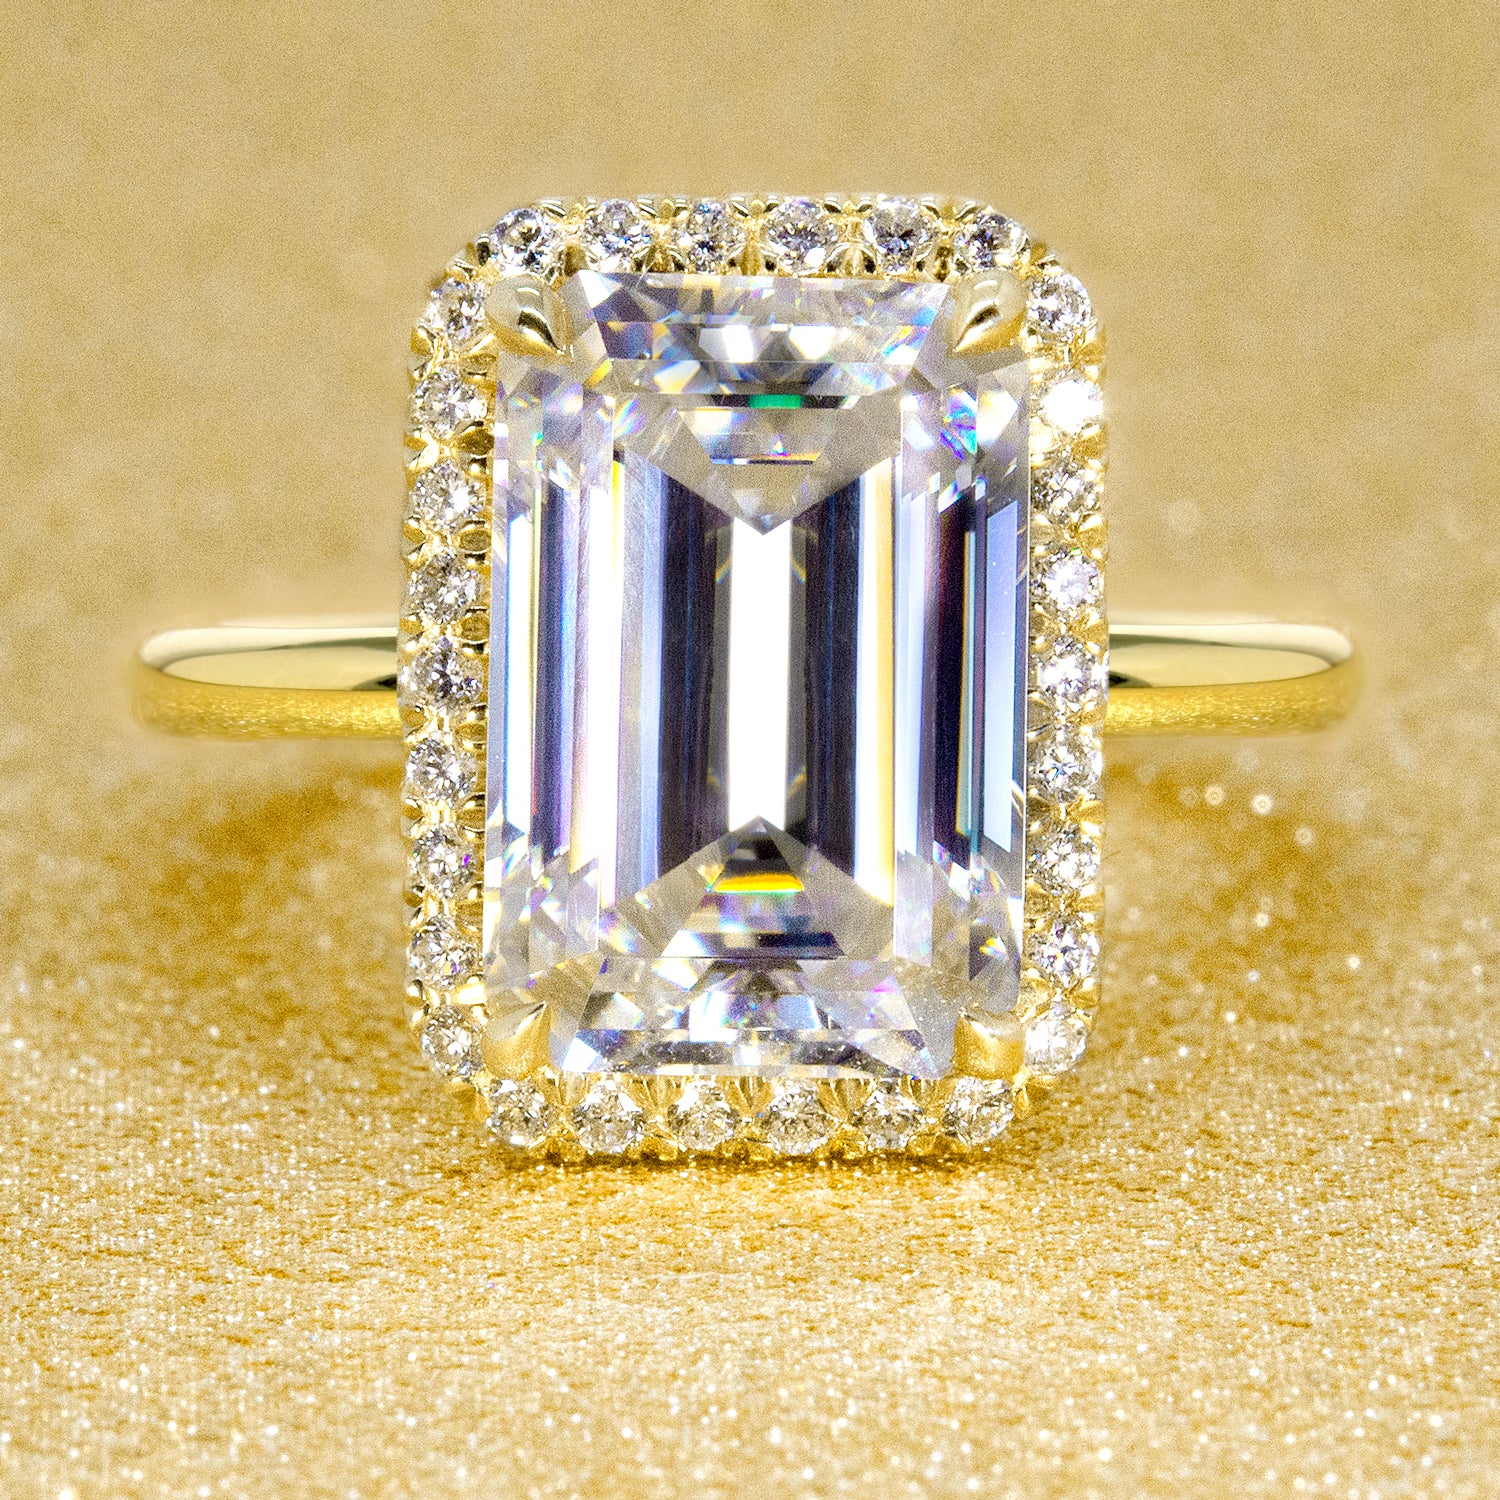 Beautiful eco-friendly, sustainable and affordable luxury fine jewelry that is handcrafted in Los Angeles. View and shop our stunning engagement ring selections of the center carat size starting from 5 carats. 